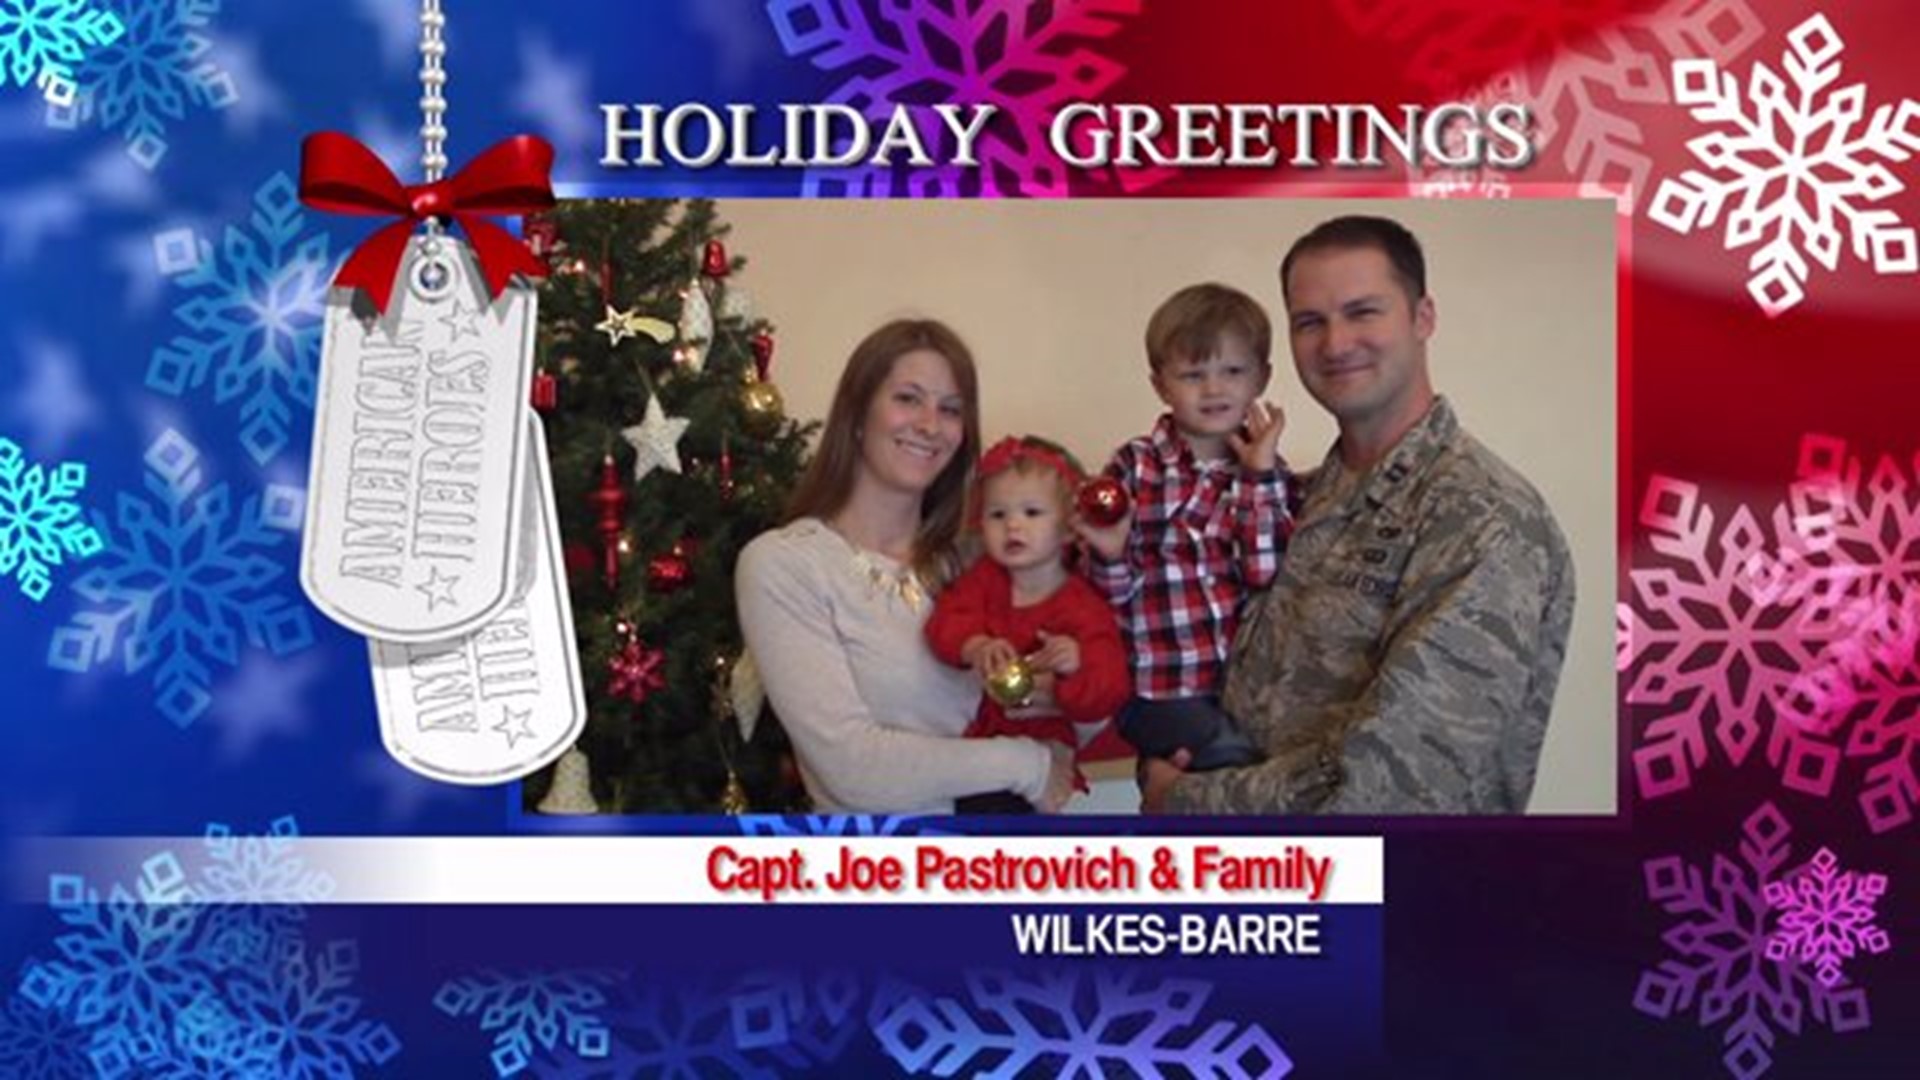 Military Greeting: Captain Joe Pastrovich and Family